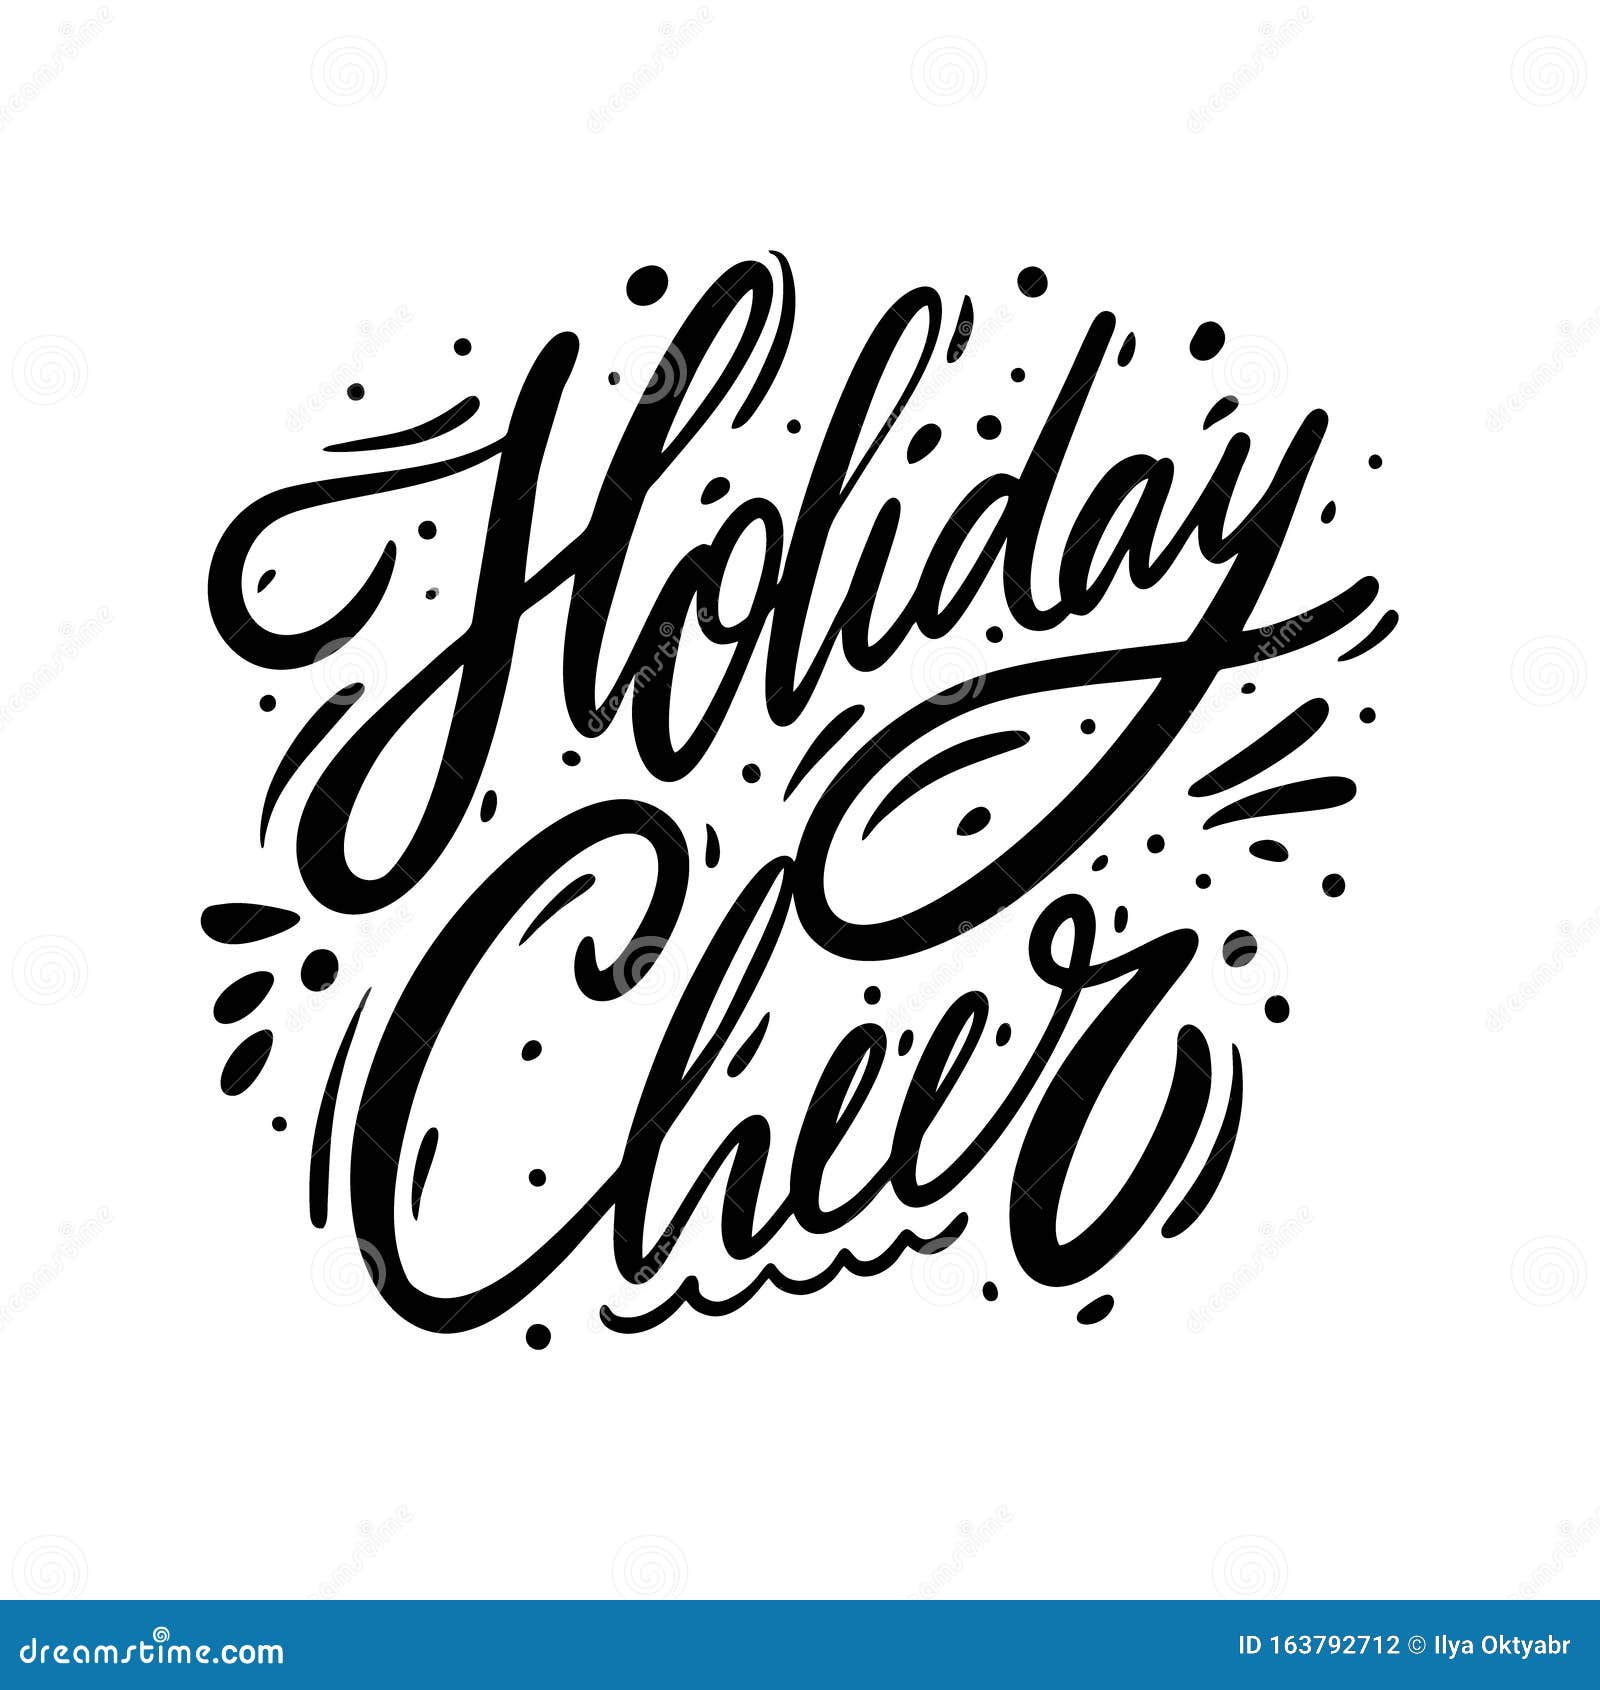 holiday cheer. christmas holiday sign. hand drawn  lettering. black ink.  on white background